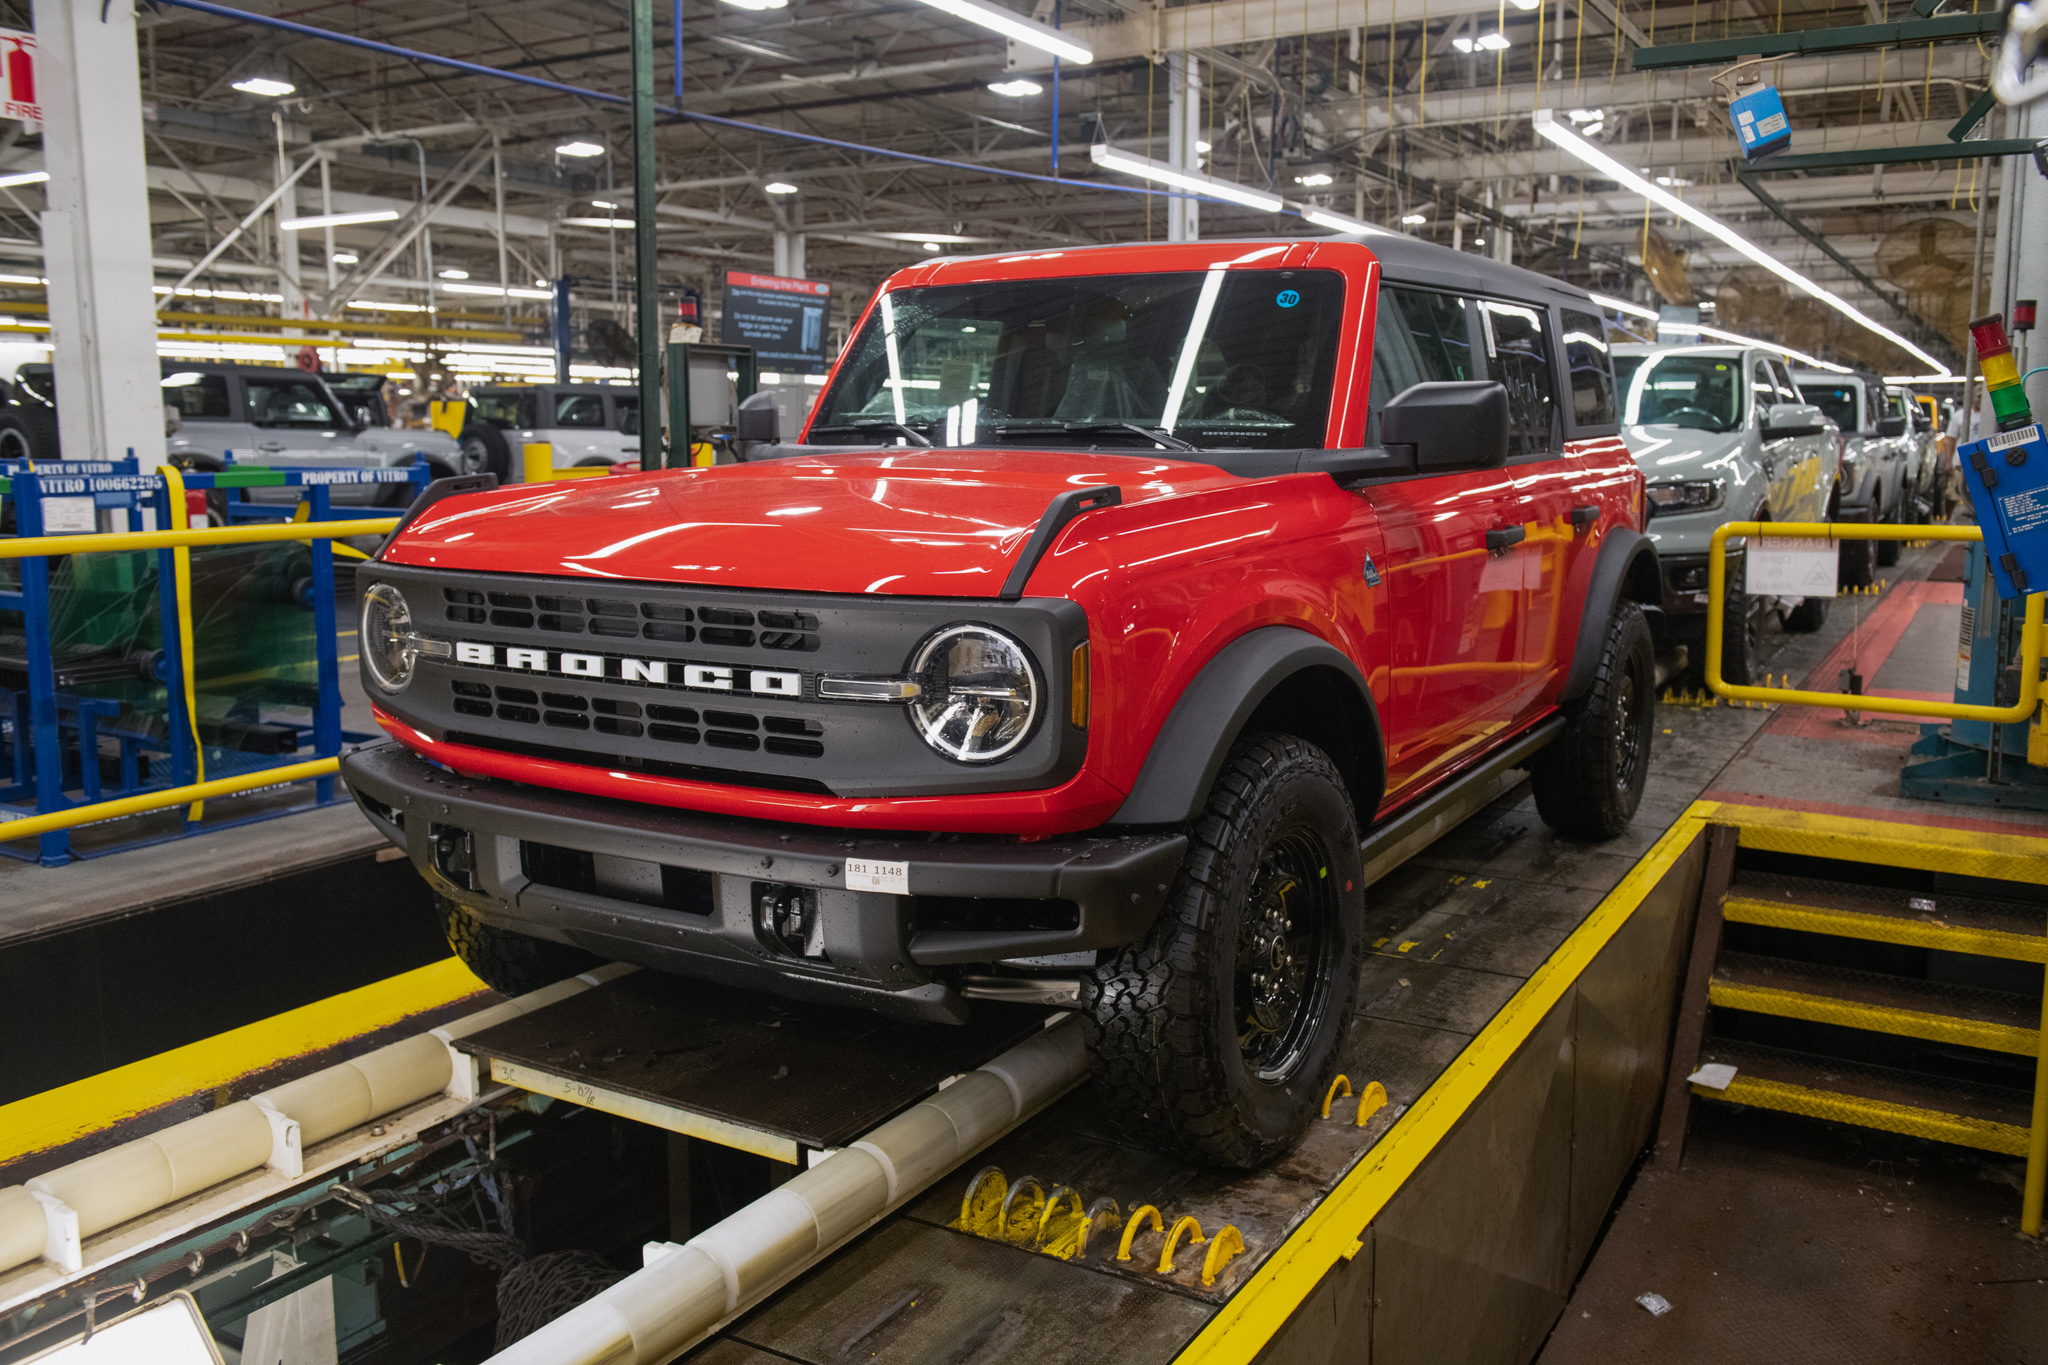 Ford Bronco Then & Now: show your assembly line Bronco and current Bronco picture 20230101_171215